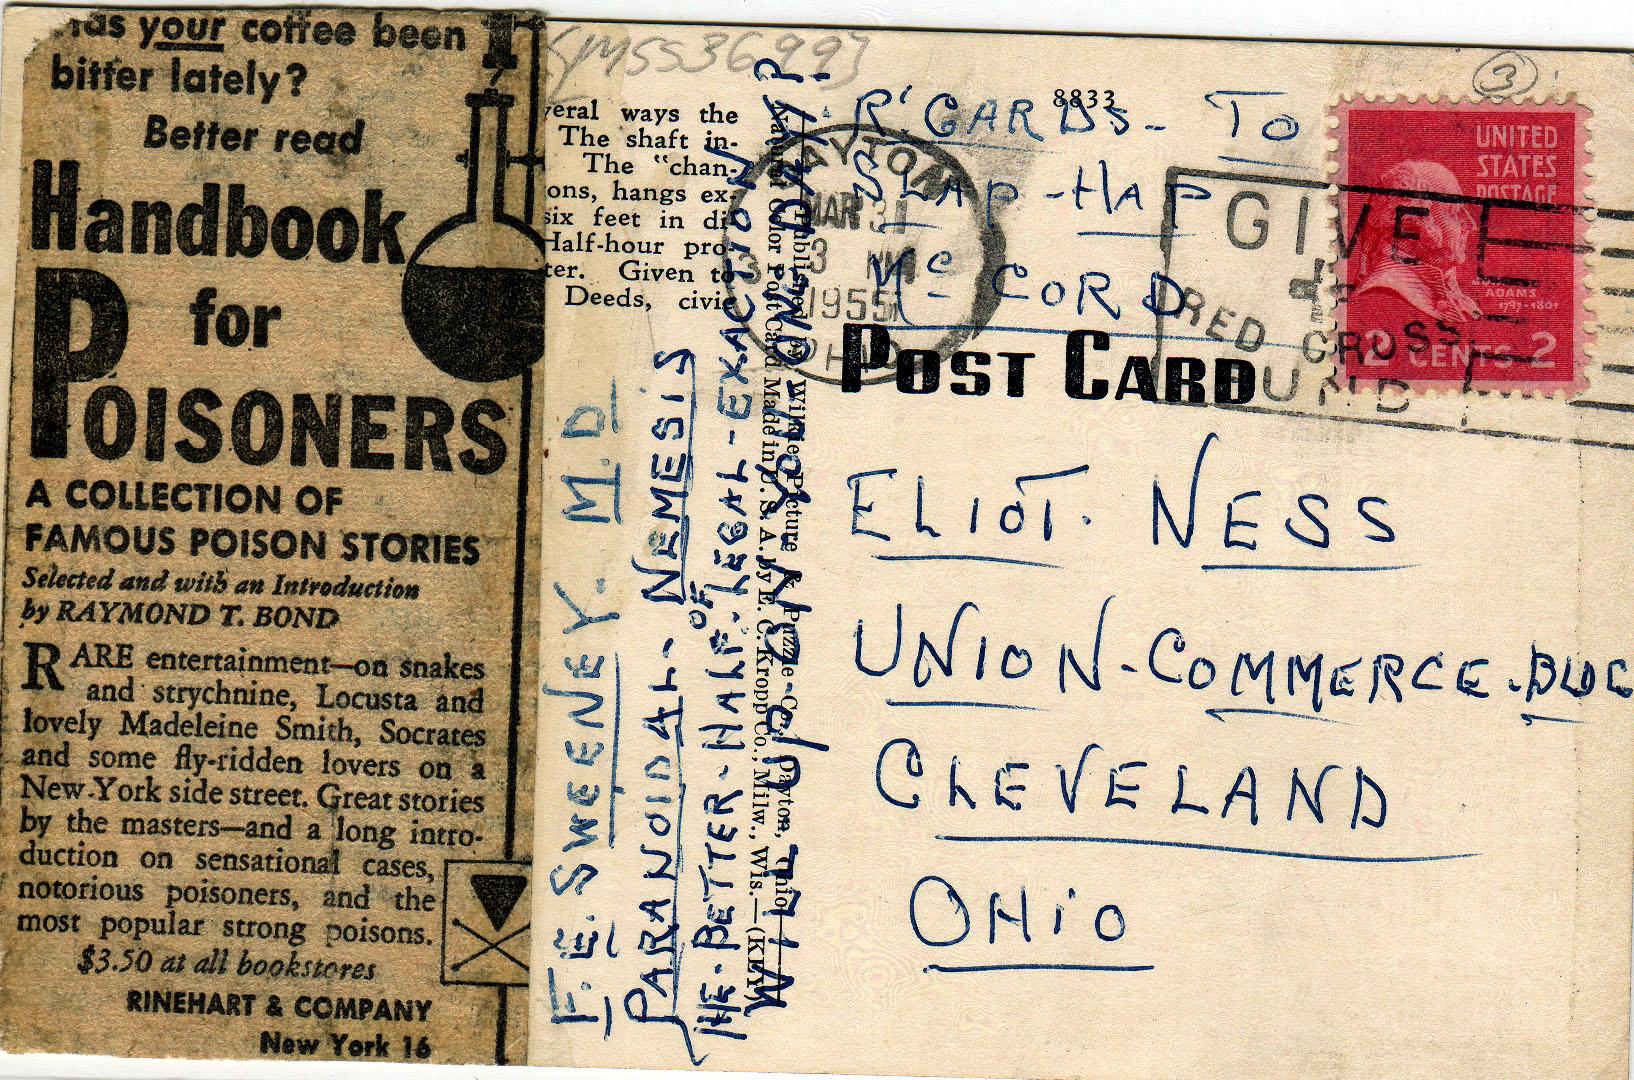 Postcard (4 of 5) sent to Eliot Ness in 1954 by an asylum inmate believed by some to have been the Torso Murderer. WRHS.